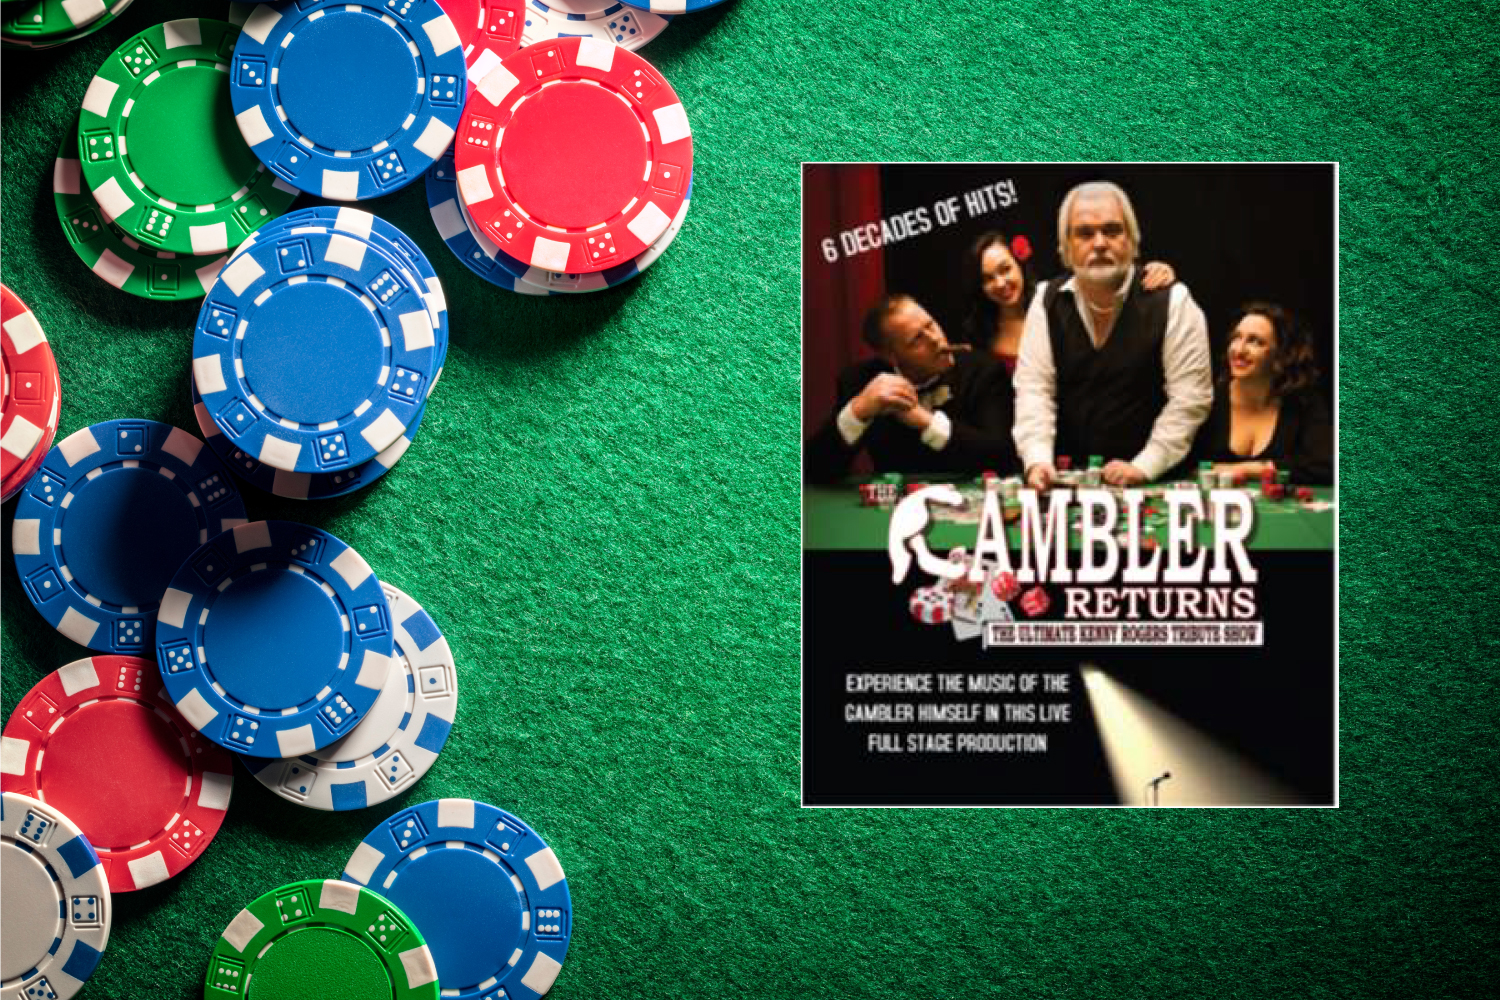 \"THE GAMBLER RETURNS\" - Kenny Rogers Tribute - GROUPS 30+